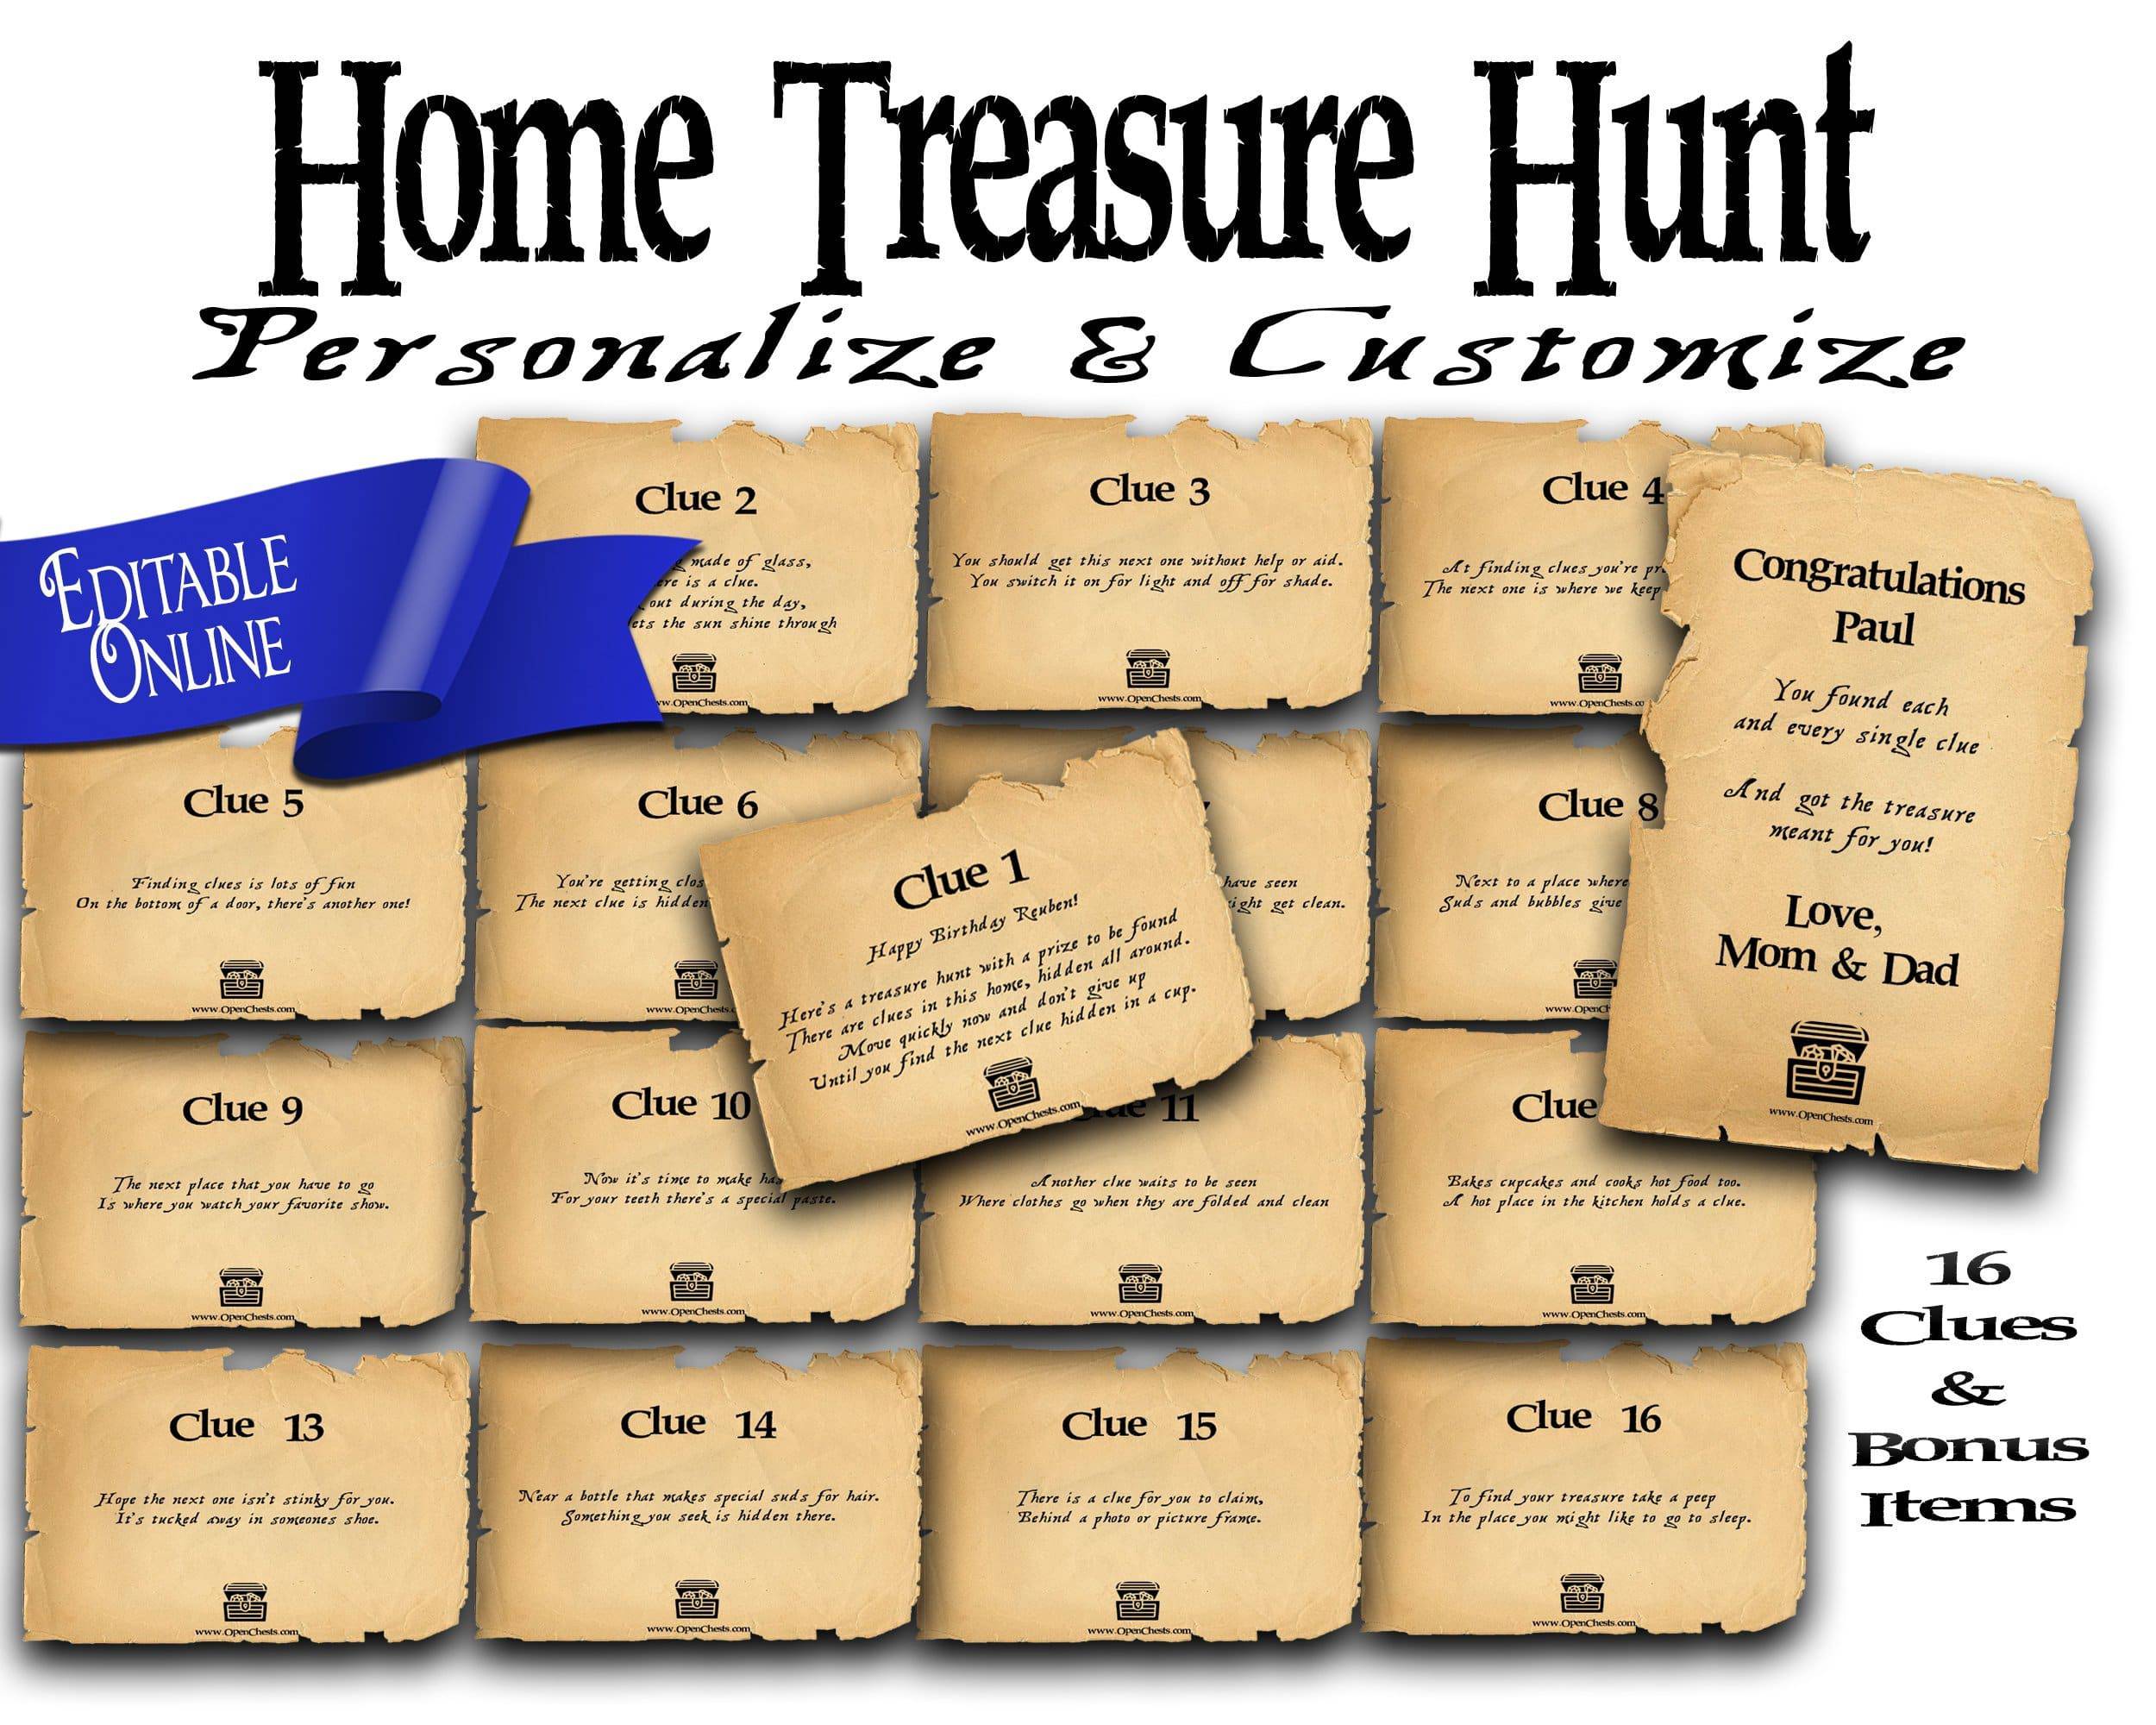 Indoor Rhyming Treasure Hunt Clues Scavenger Printable - Suitable for all homes - Open Chests